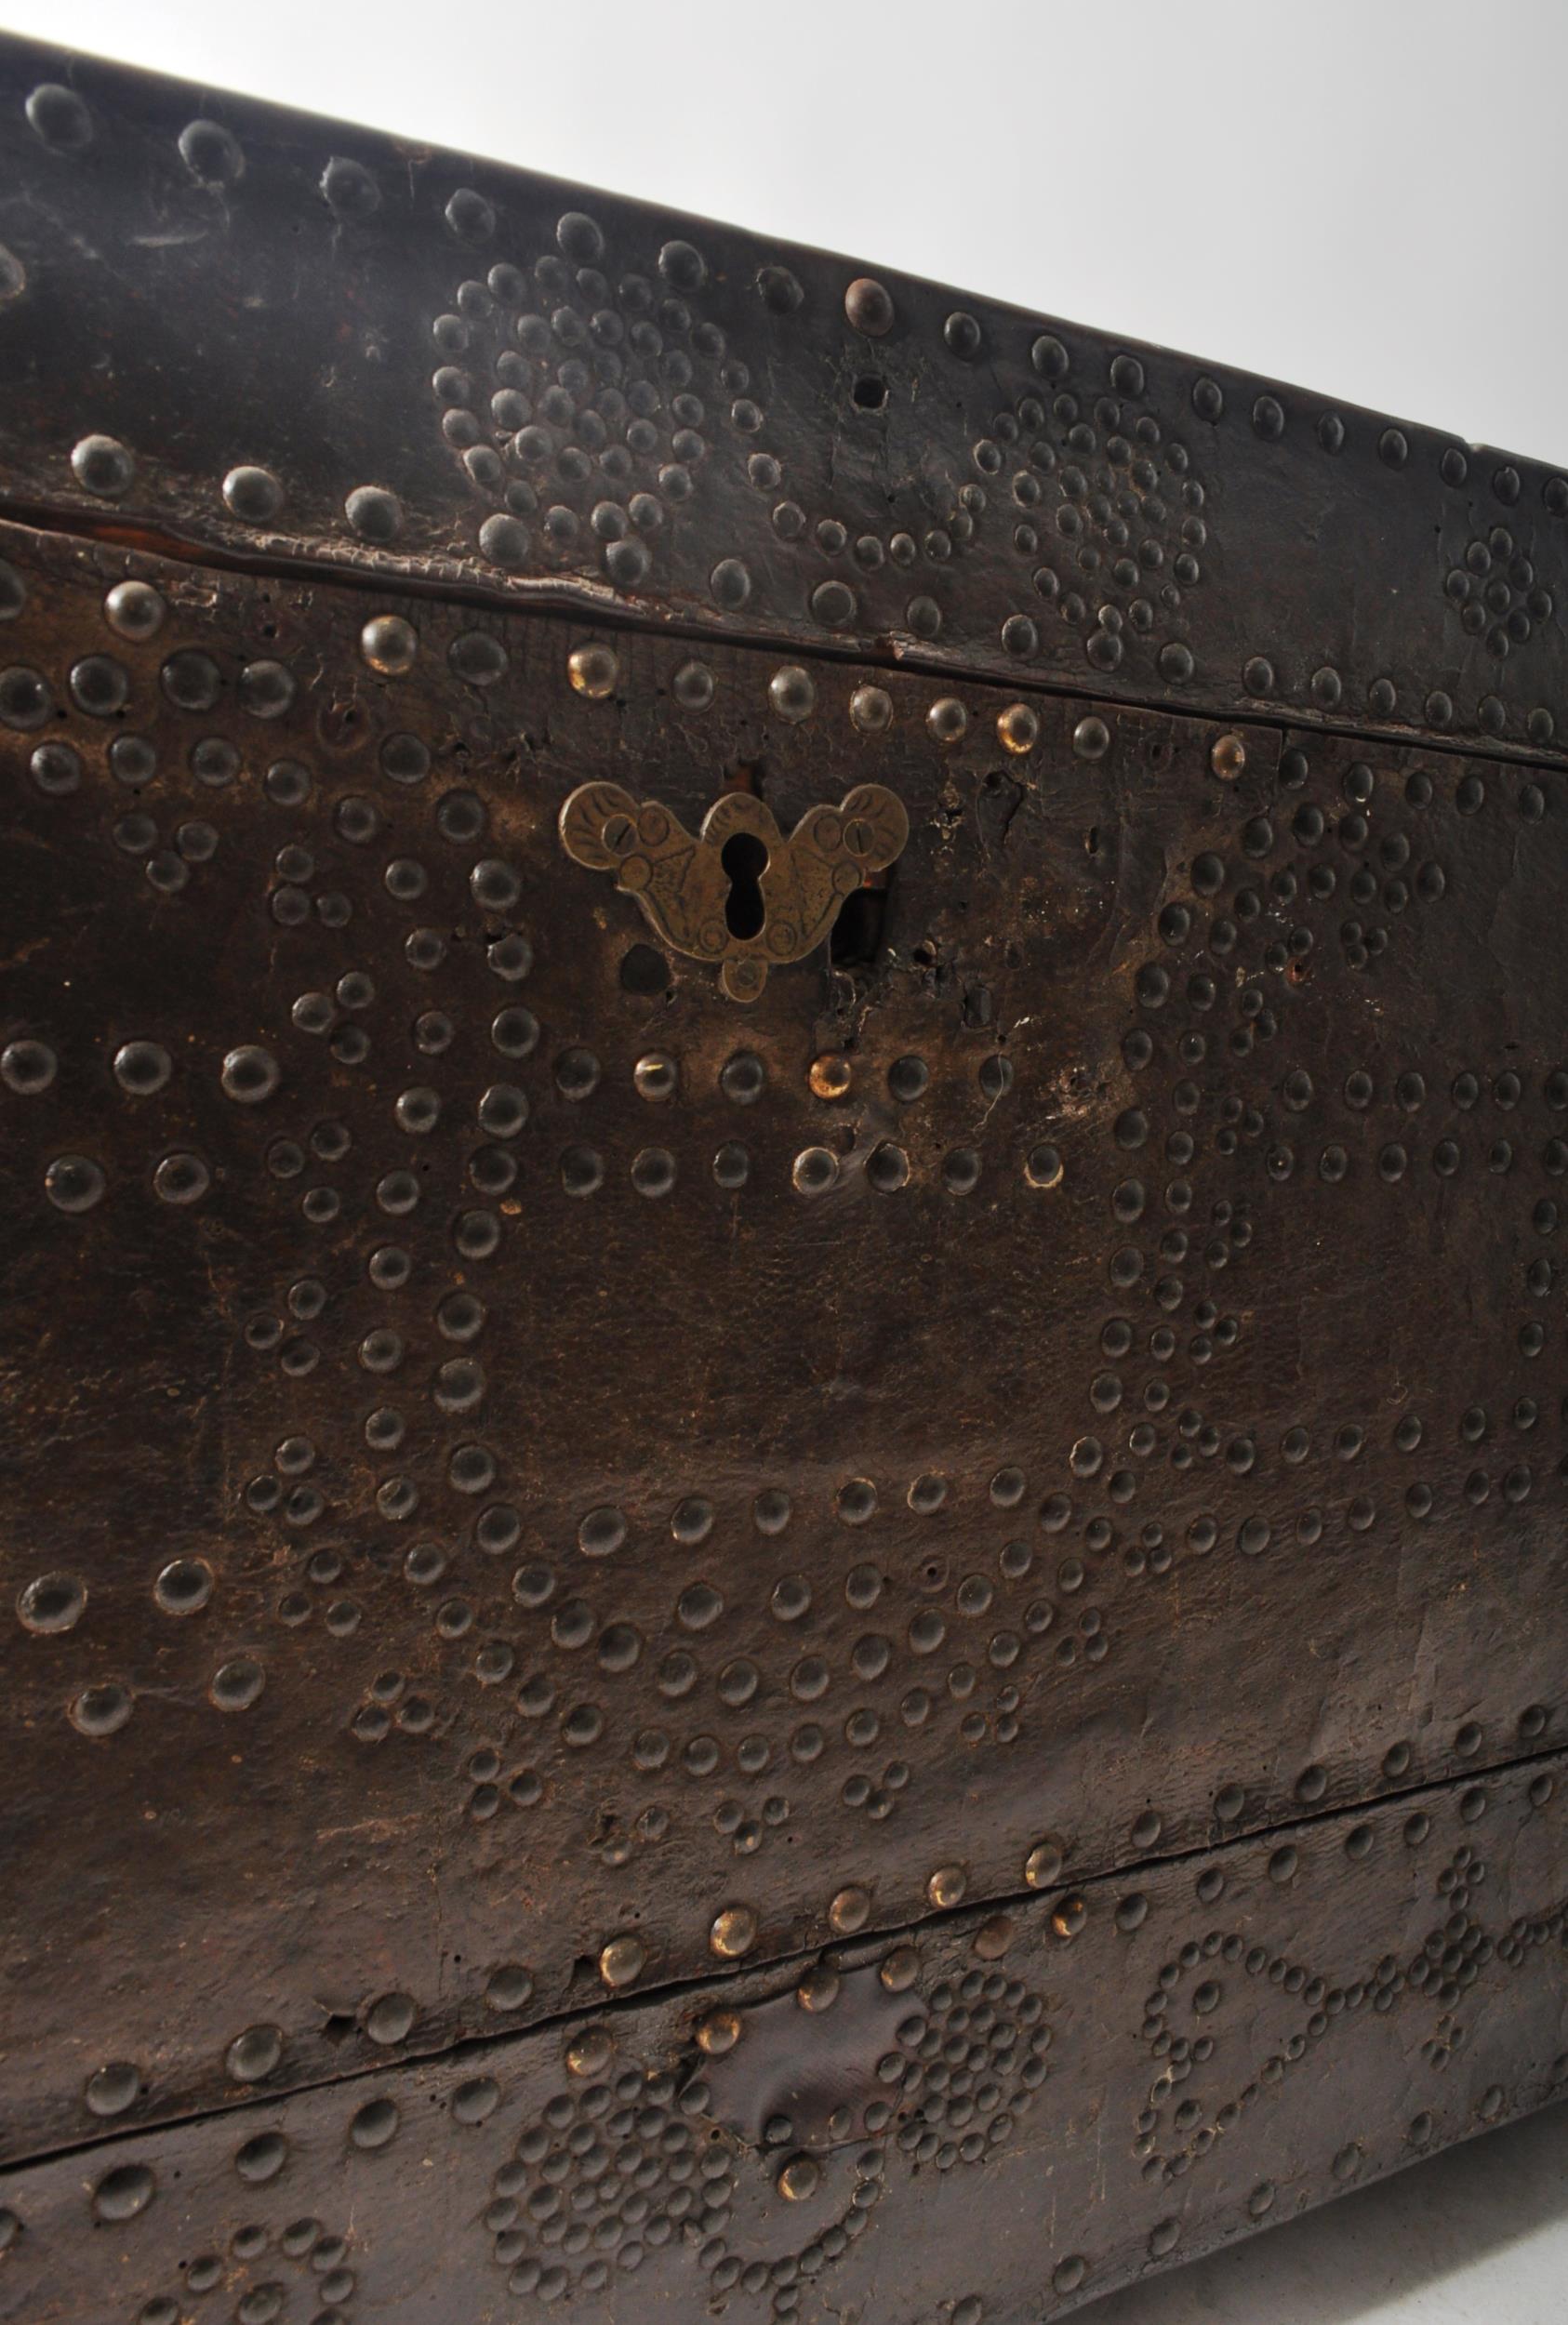 17TH CENTURY 1684 JAMES II OAK & LEATHER STUD WORKED CHEST - Image 6 of 11